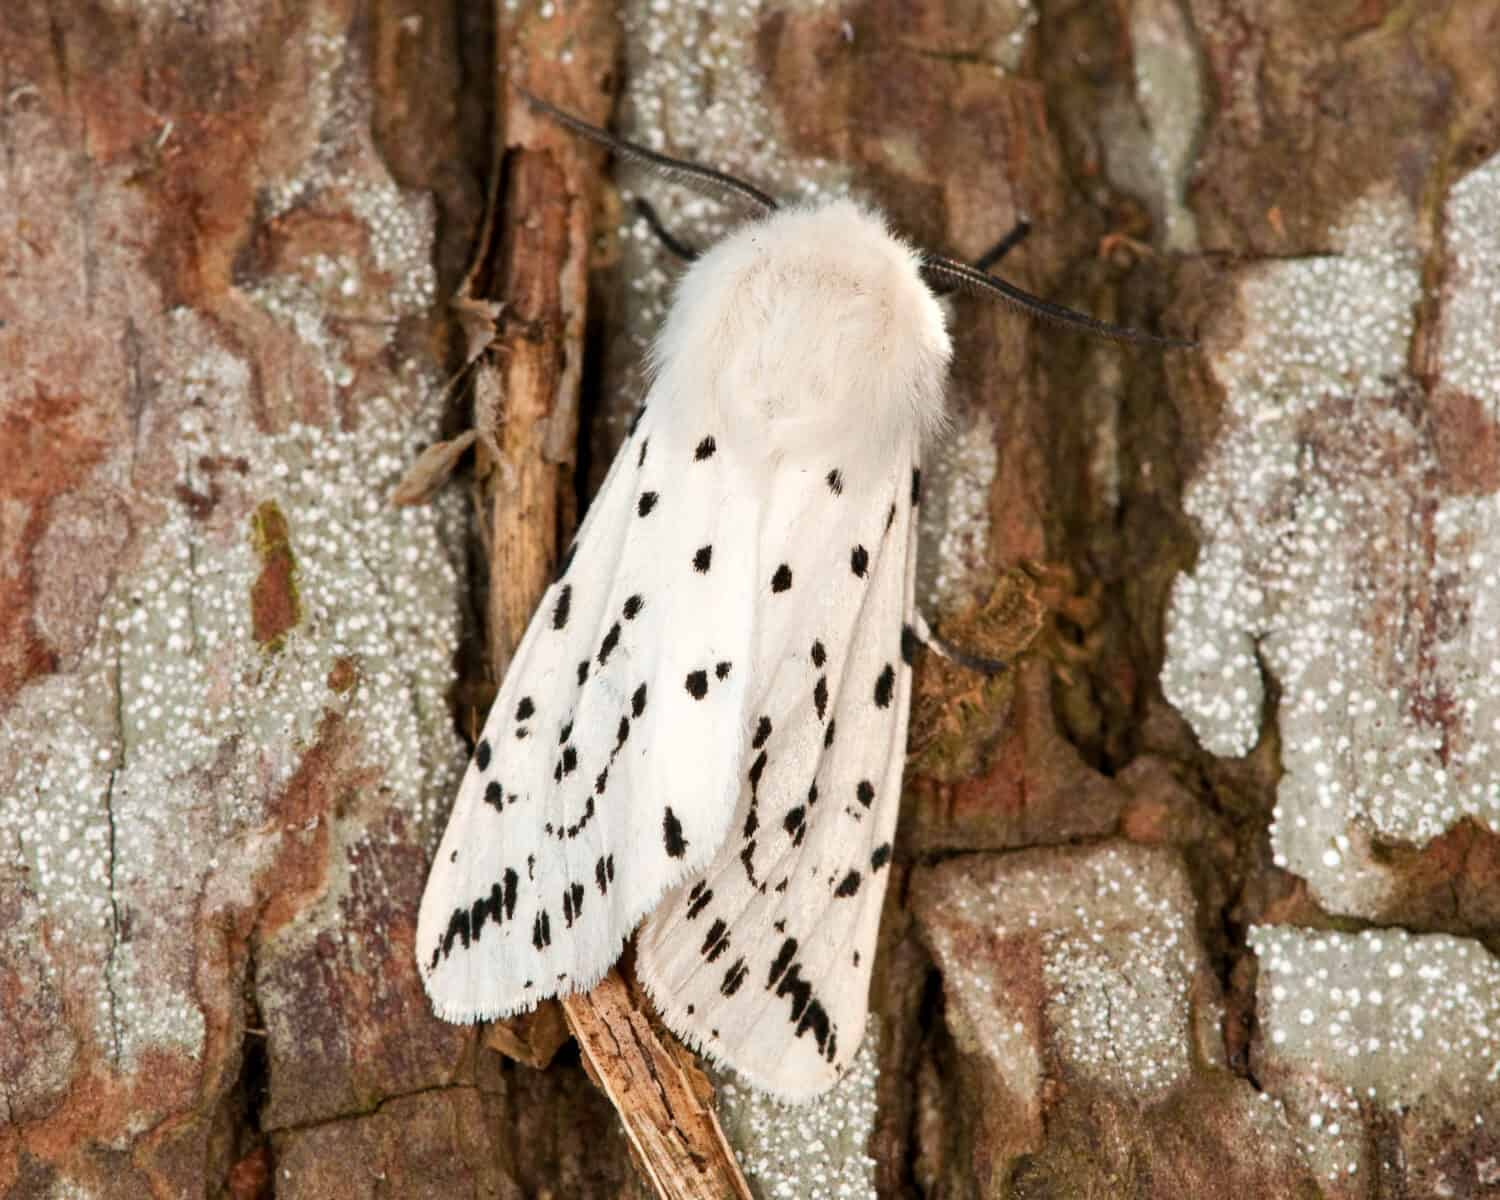 White Ermine Moth on a tree trunk